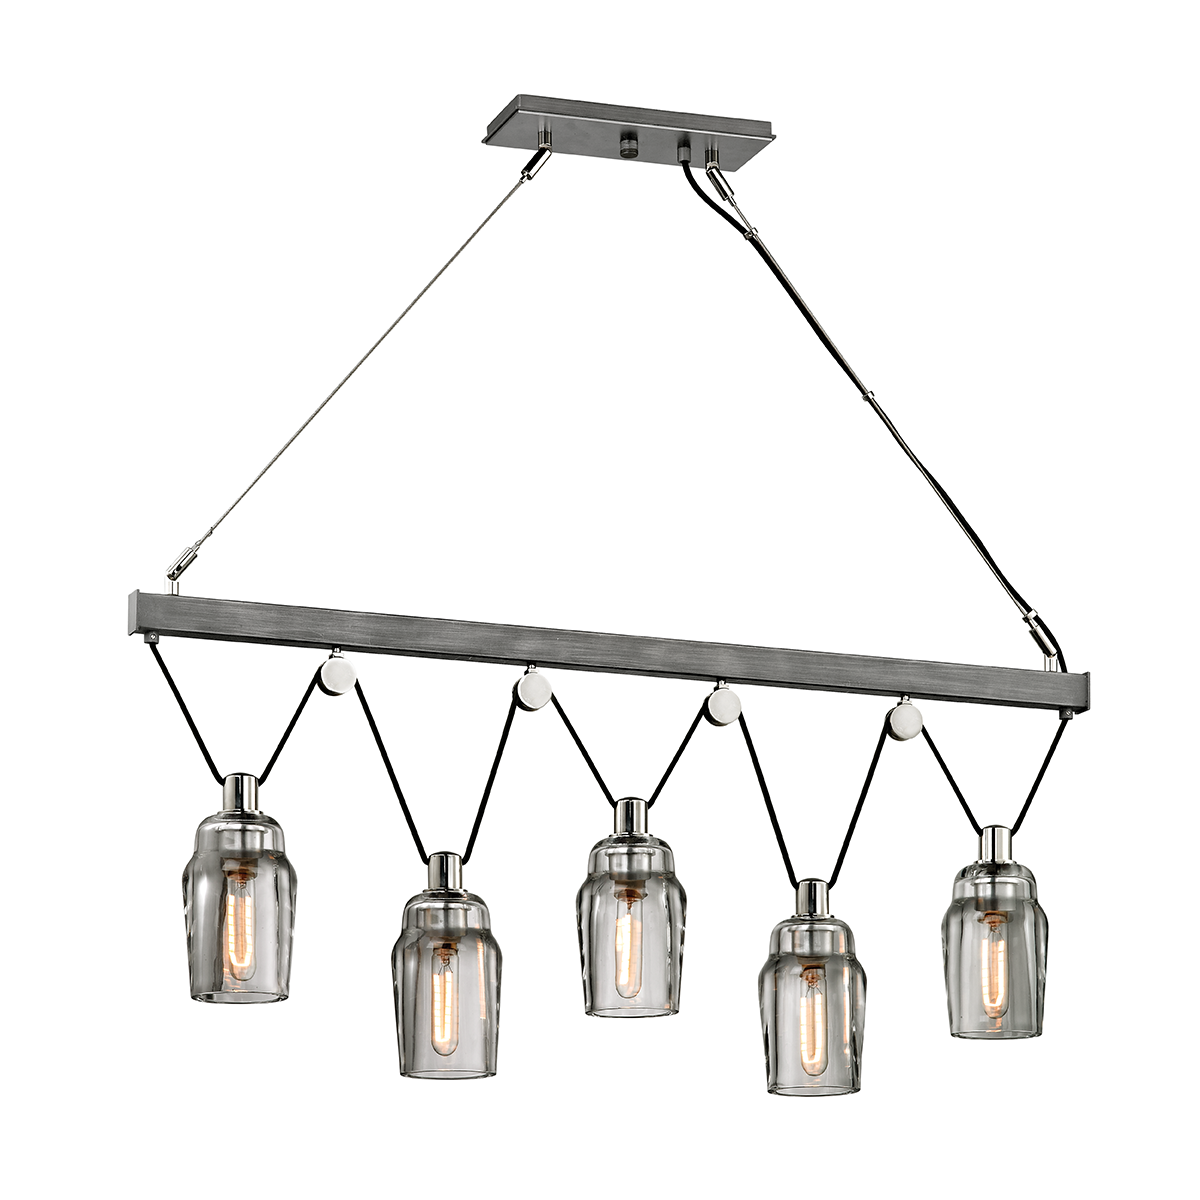 Troy Lighting Citizen Linear Linear Troy Lighting GRAPHITE AND POLISHED NICKEL 44.75x4.75x19 